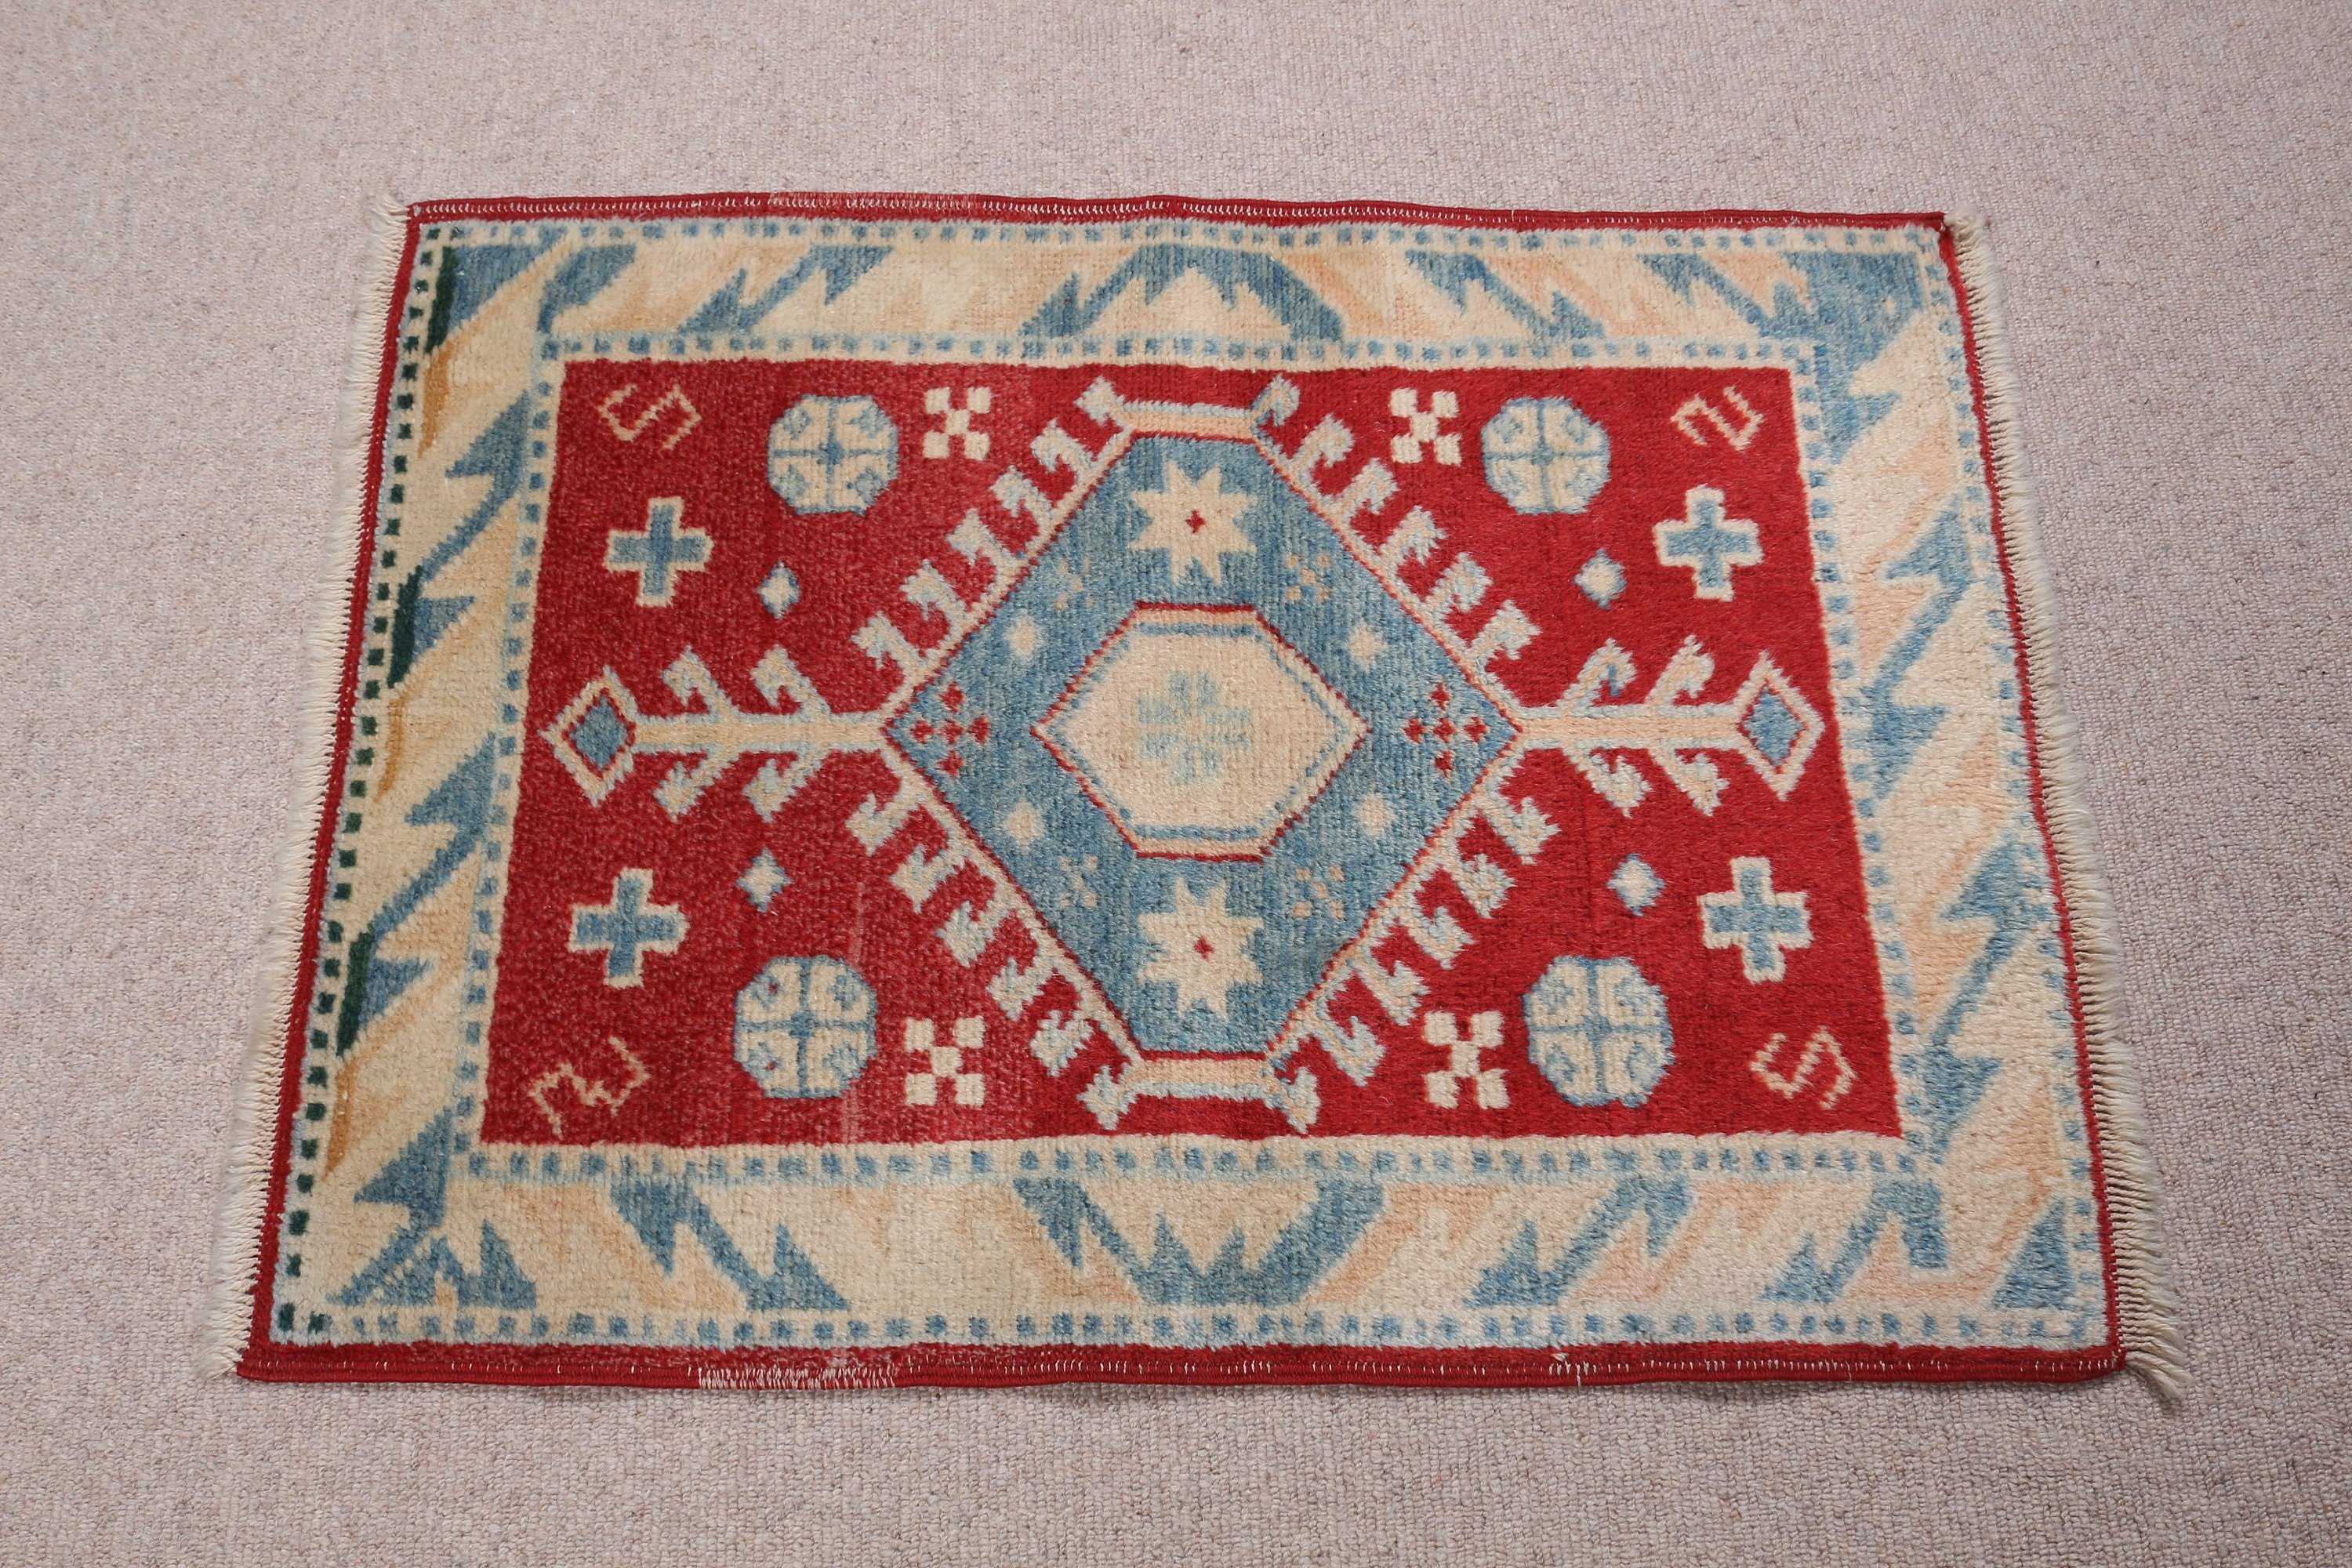 Kitchen Rugs, Turkish Rugs, Home Decor Rugs, Distressed Rug, Anatolian Rugs, Door Mat Rug, 2x2.7 ft Small Rug, Vintage Rugs, Red Cool Rug